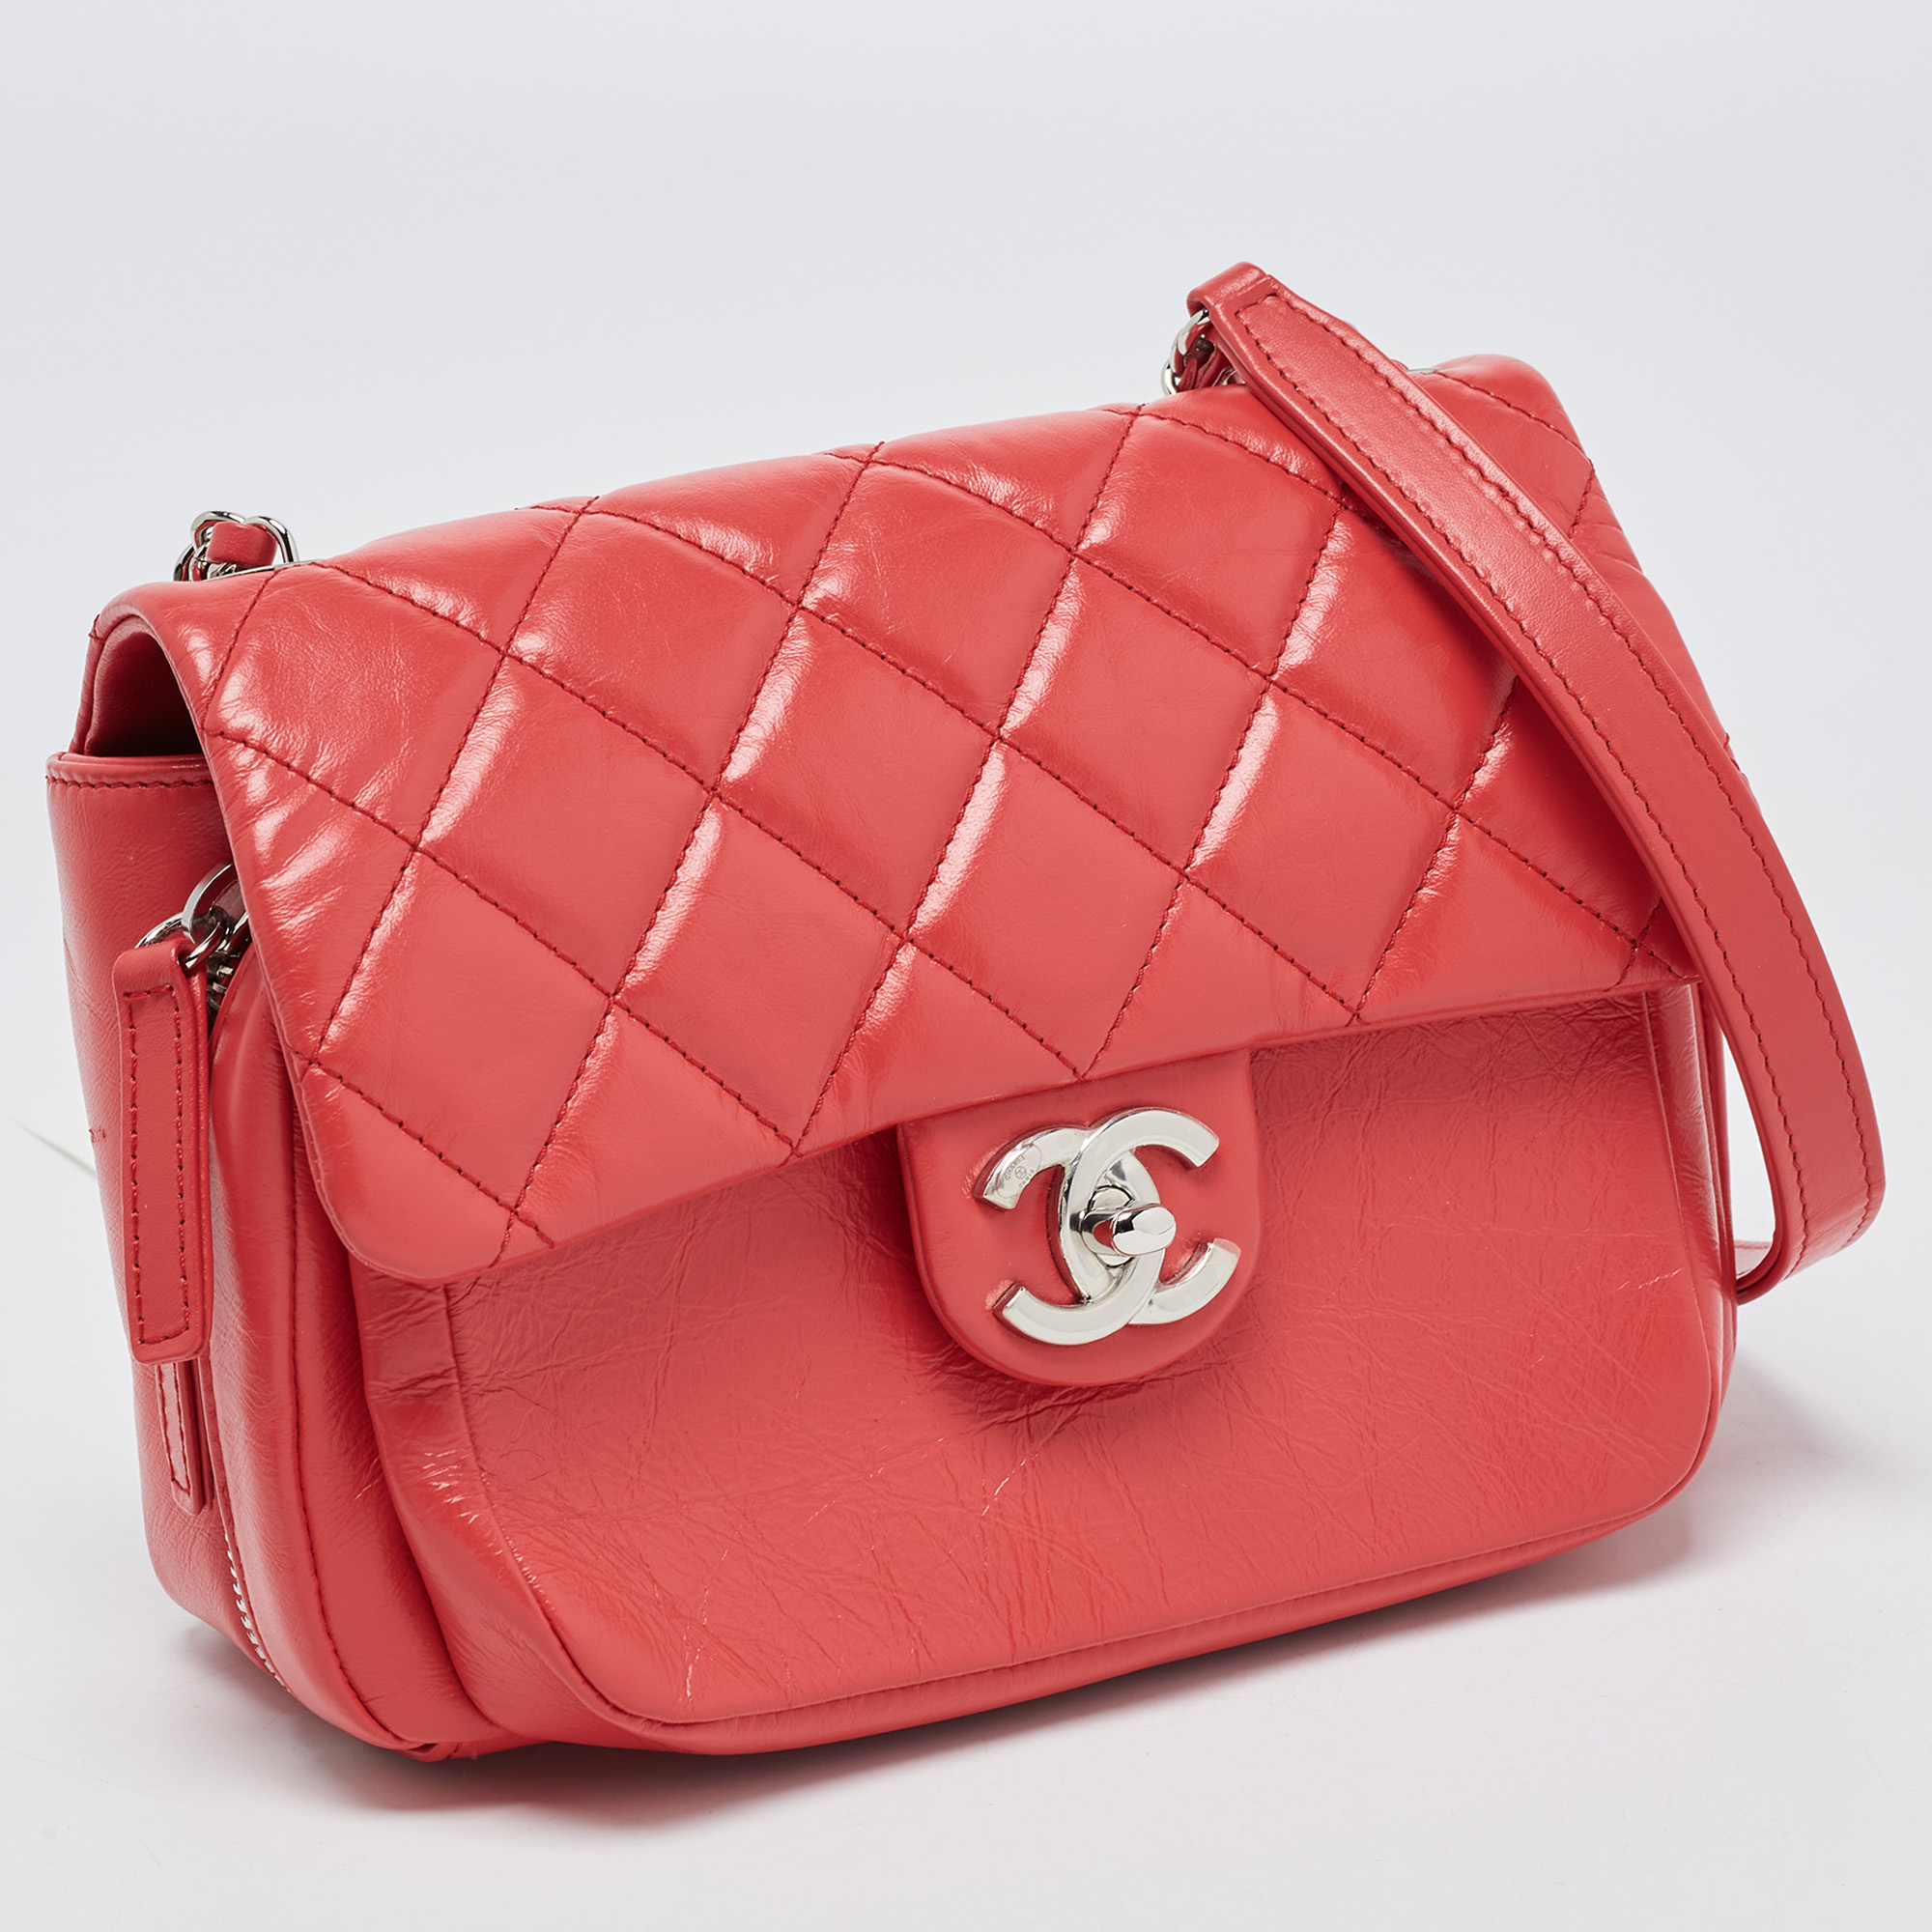 Chanel Pink Coral Quilted Leather Express Zip Around Flap Bag